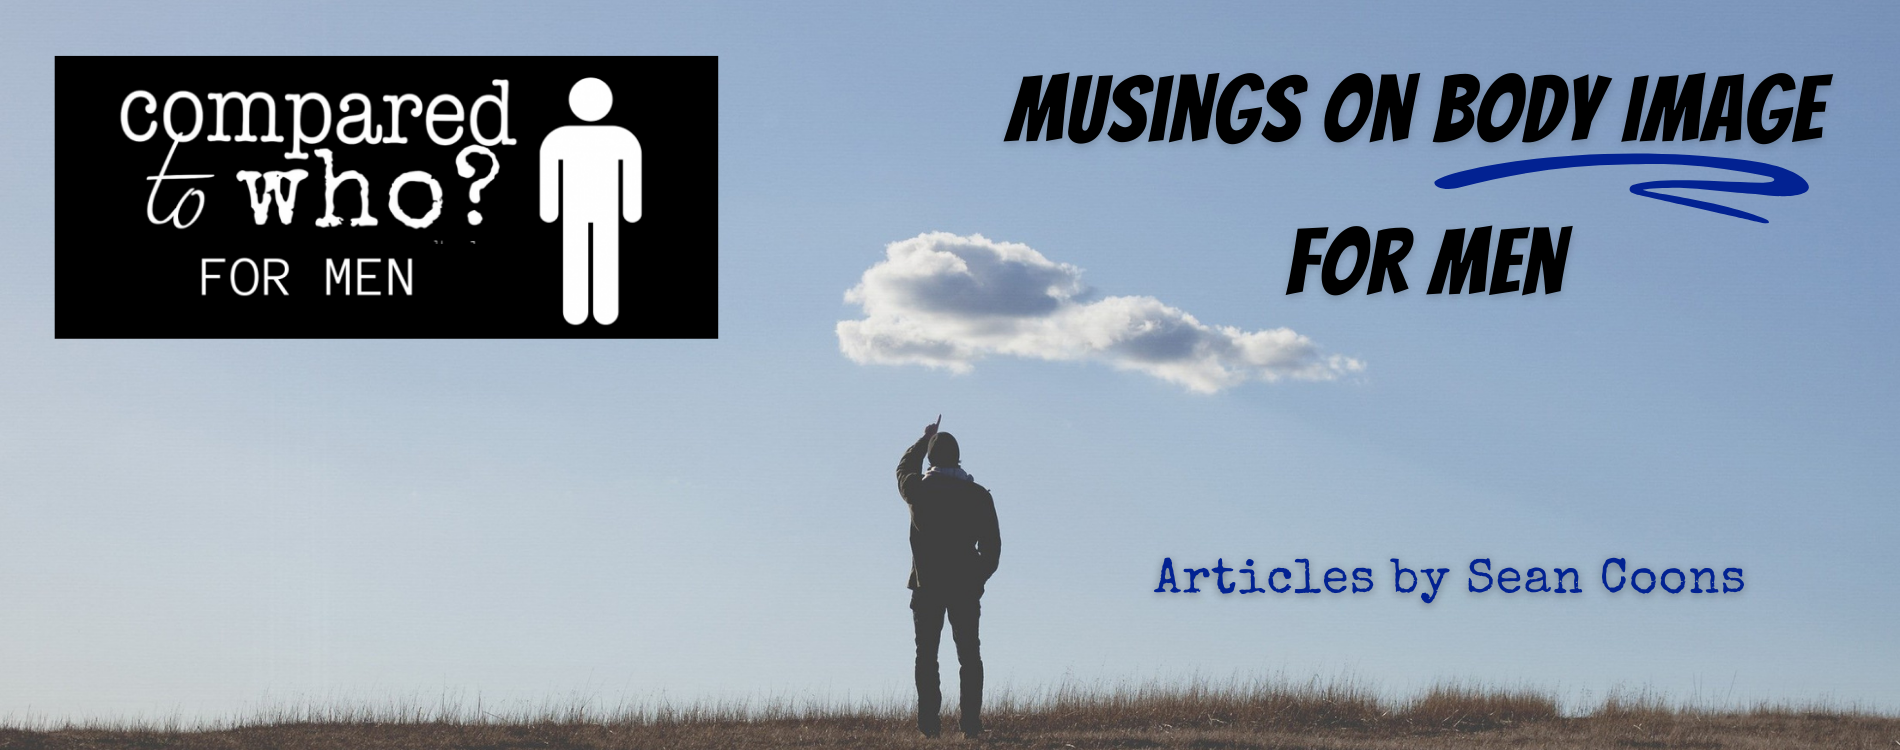 Musings on Body Image for Men - articles by Sean Coons